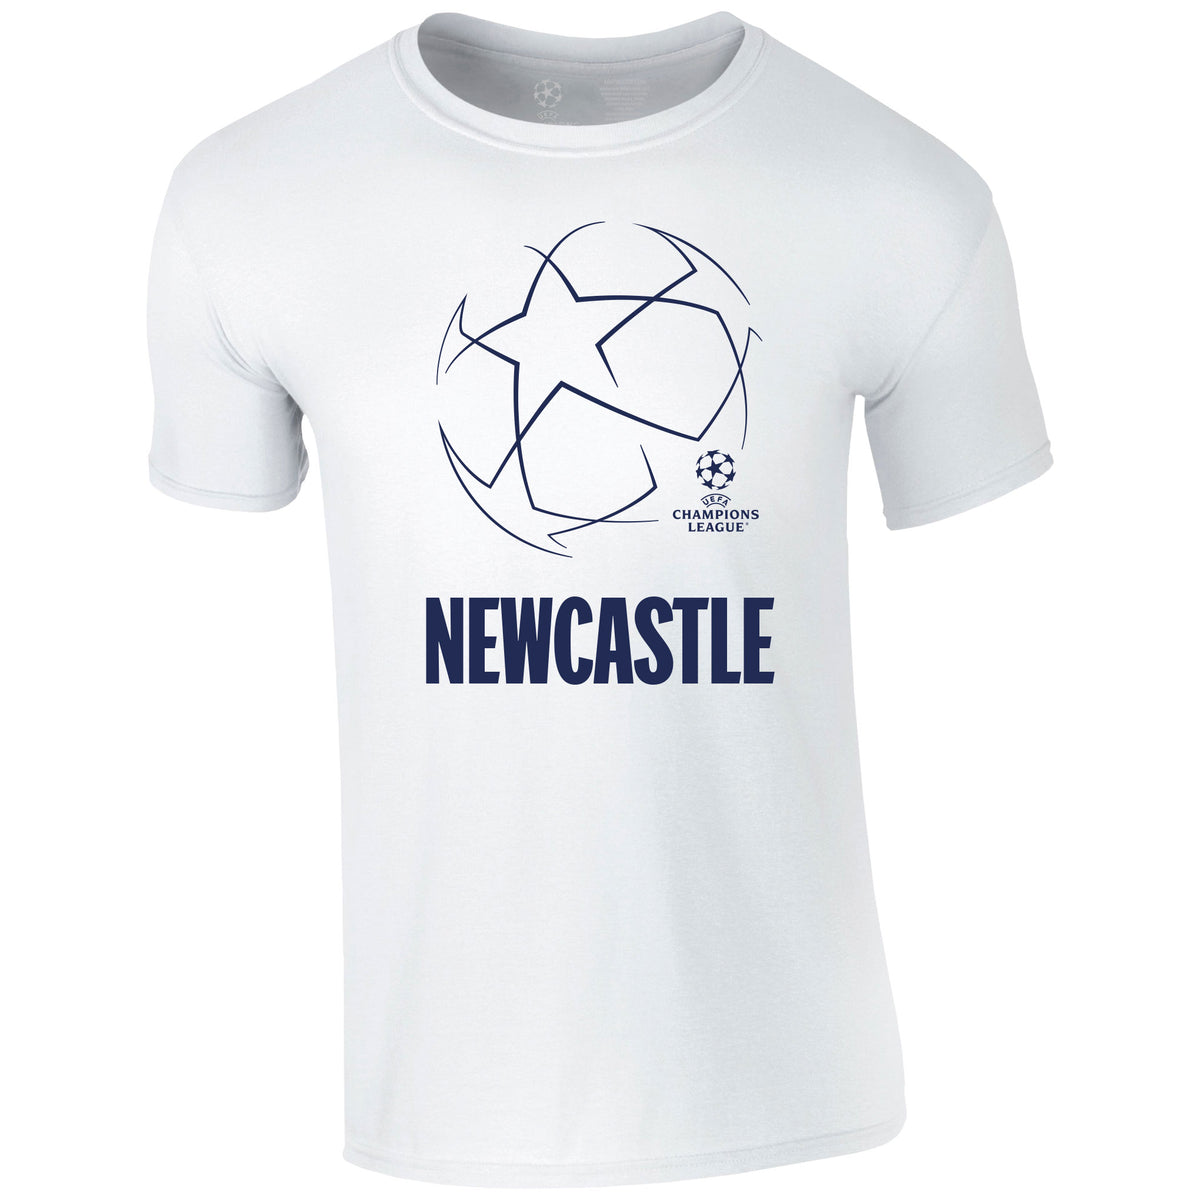 Champions League Starball Newcastle City T-Shirt White